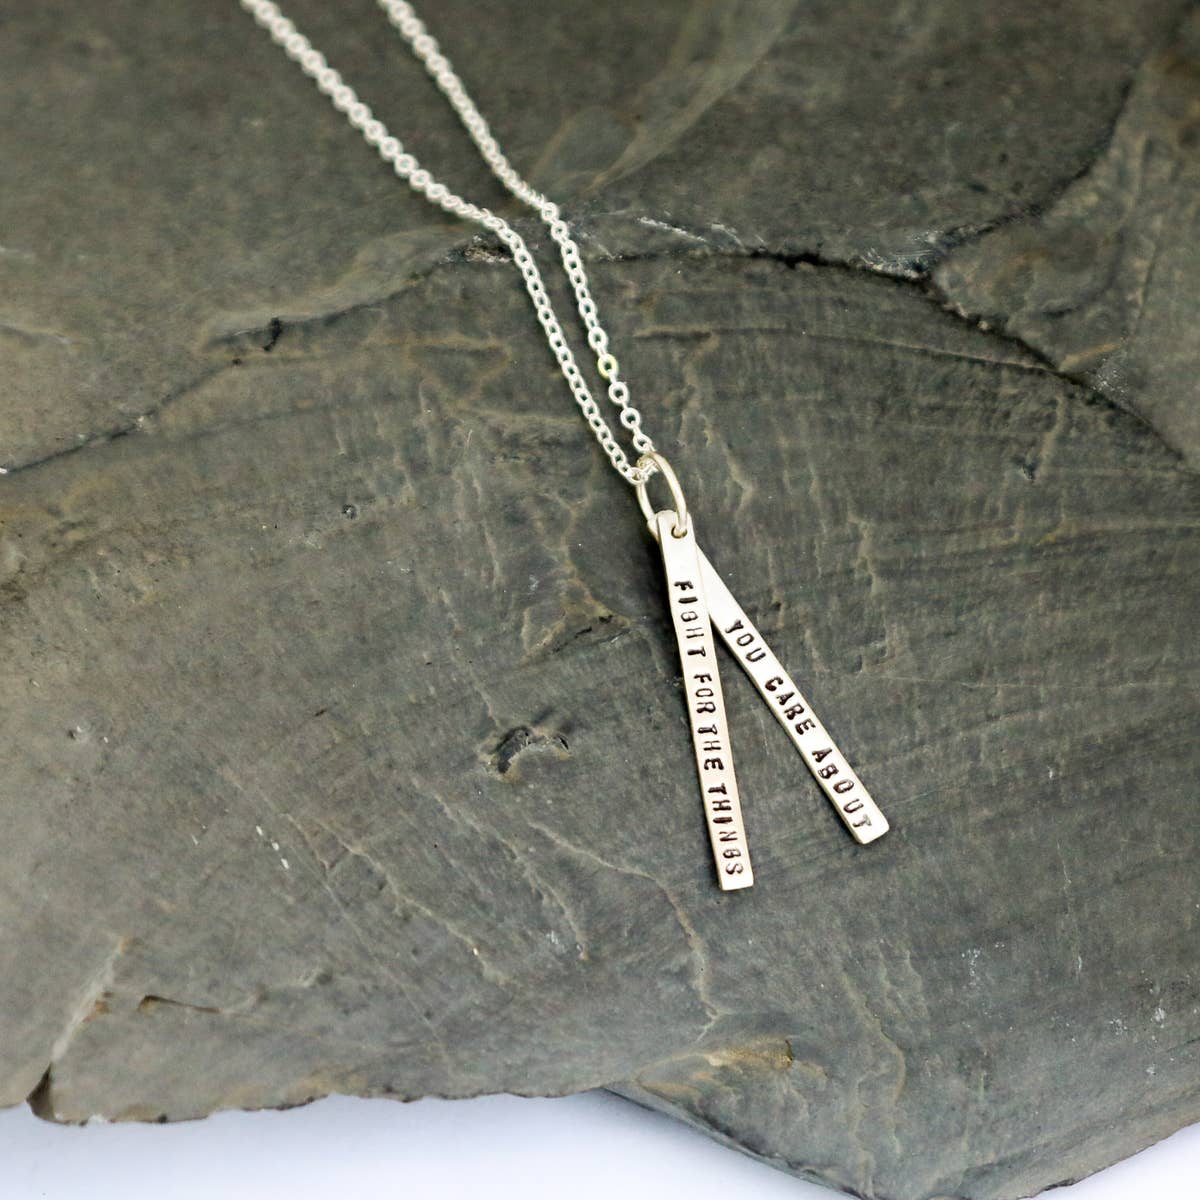 Chocolate and Steel Necklaces Sterling Silver Ruth Bader Ginsburg Quote Necklace: "Fight for the things you care about" - Sterling Silver or Gold